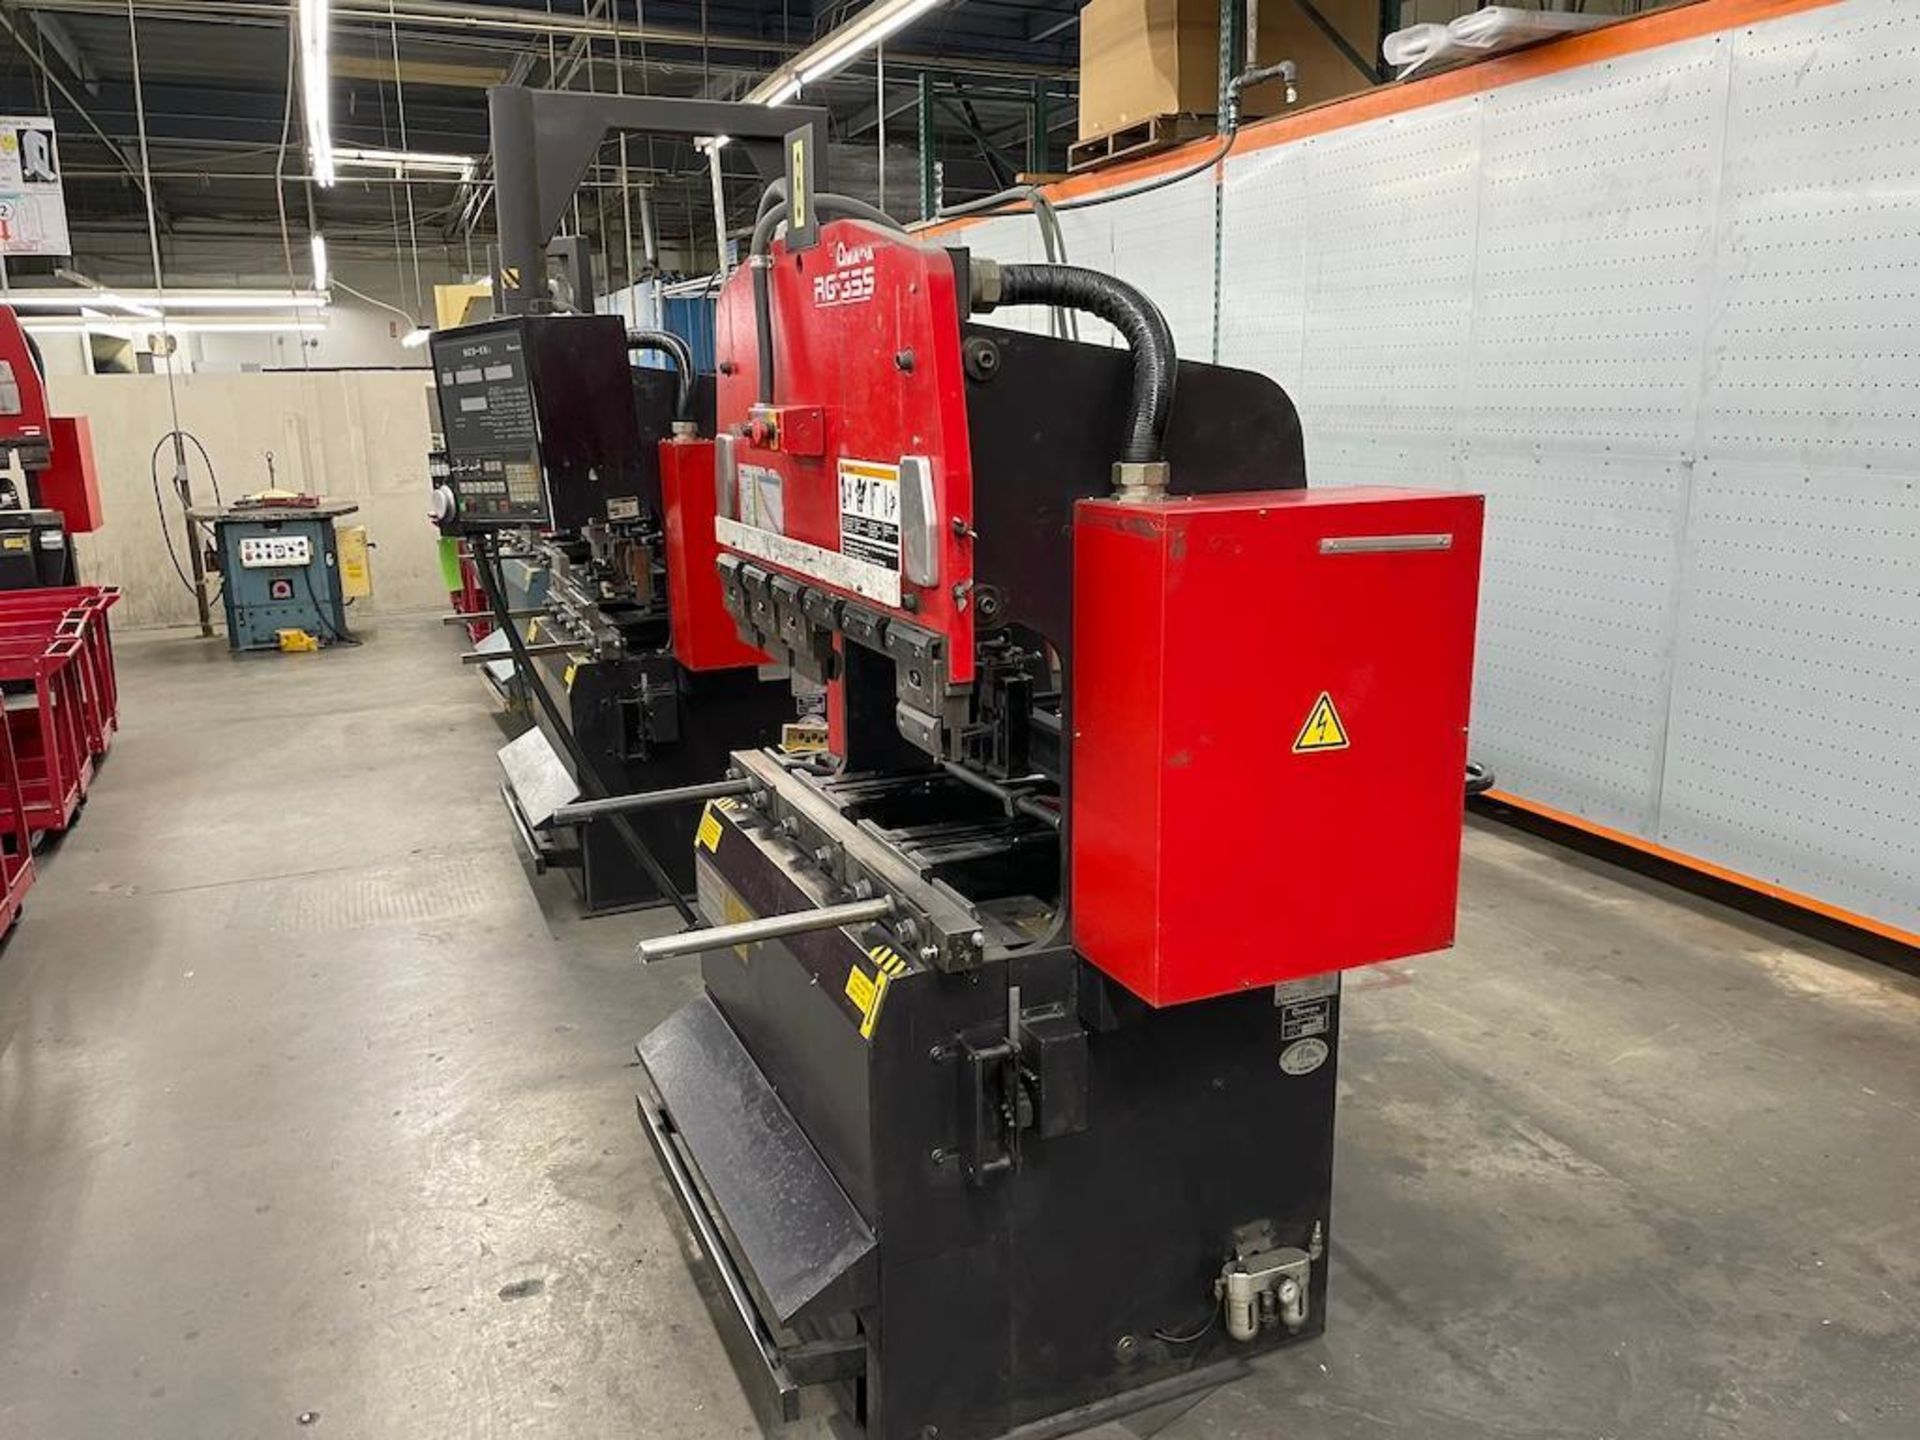 AMADA RG 35S PRESS BRAKE, 35 TON X 47.3 IN BED, NC9-EXII CONTROL, 2 AXIS BACK GAUGE, 47.3 IN BED, - Image 8 of 8